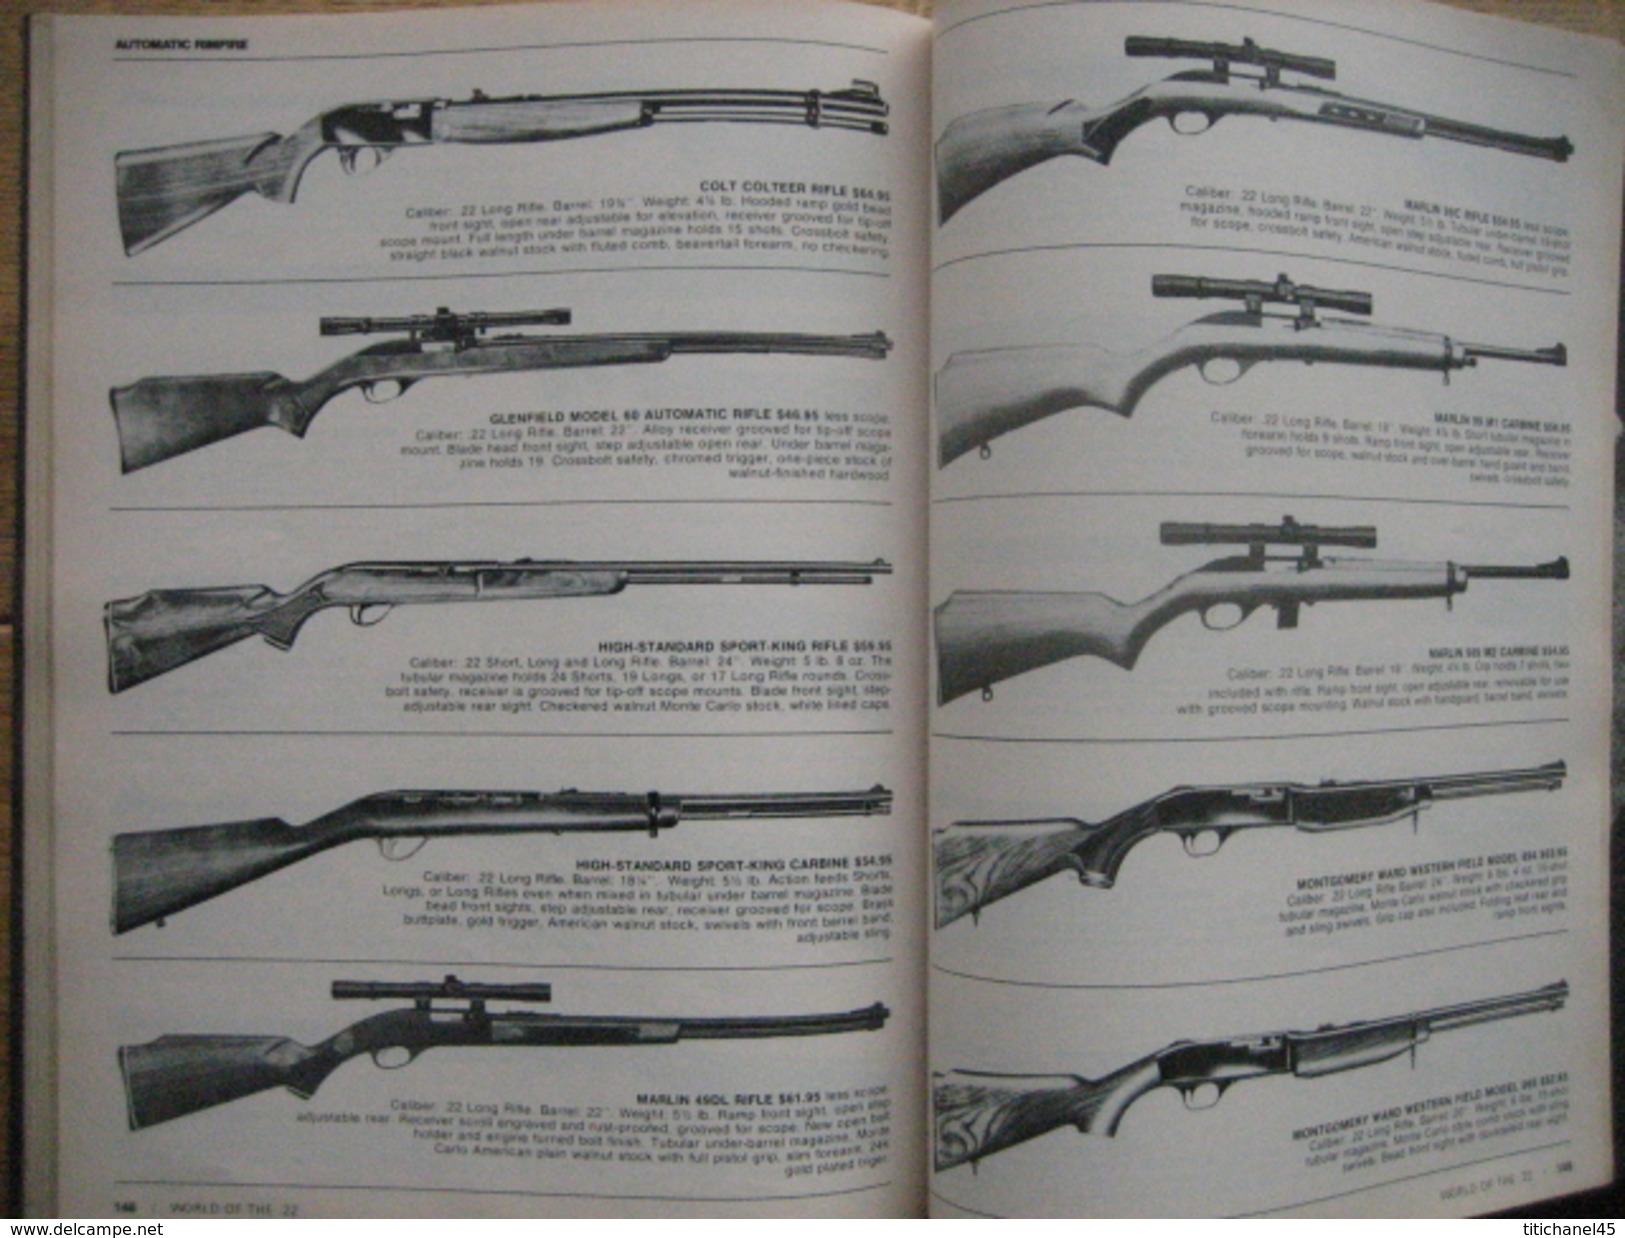 Rare WONDERFUL WORLD OF THE .22 by John LACHUK - COMPLETE CATALOGING OF .22 RIFLES AND HANDGUNS - PRICES, SPECS